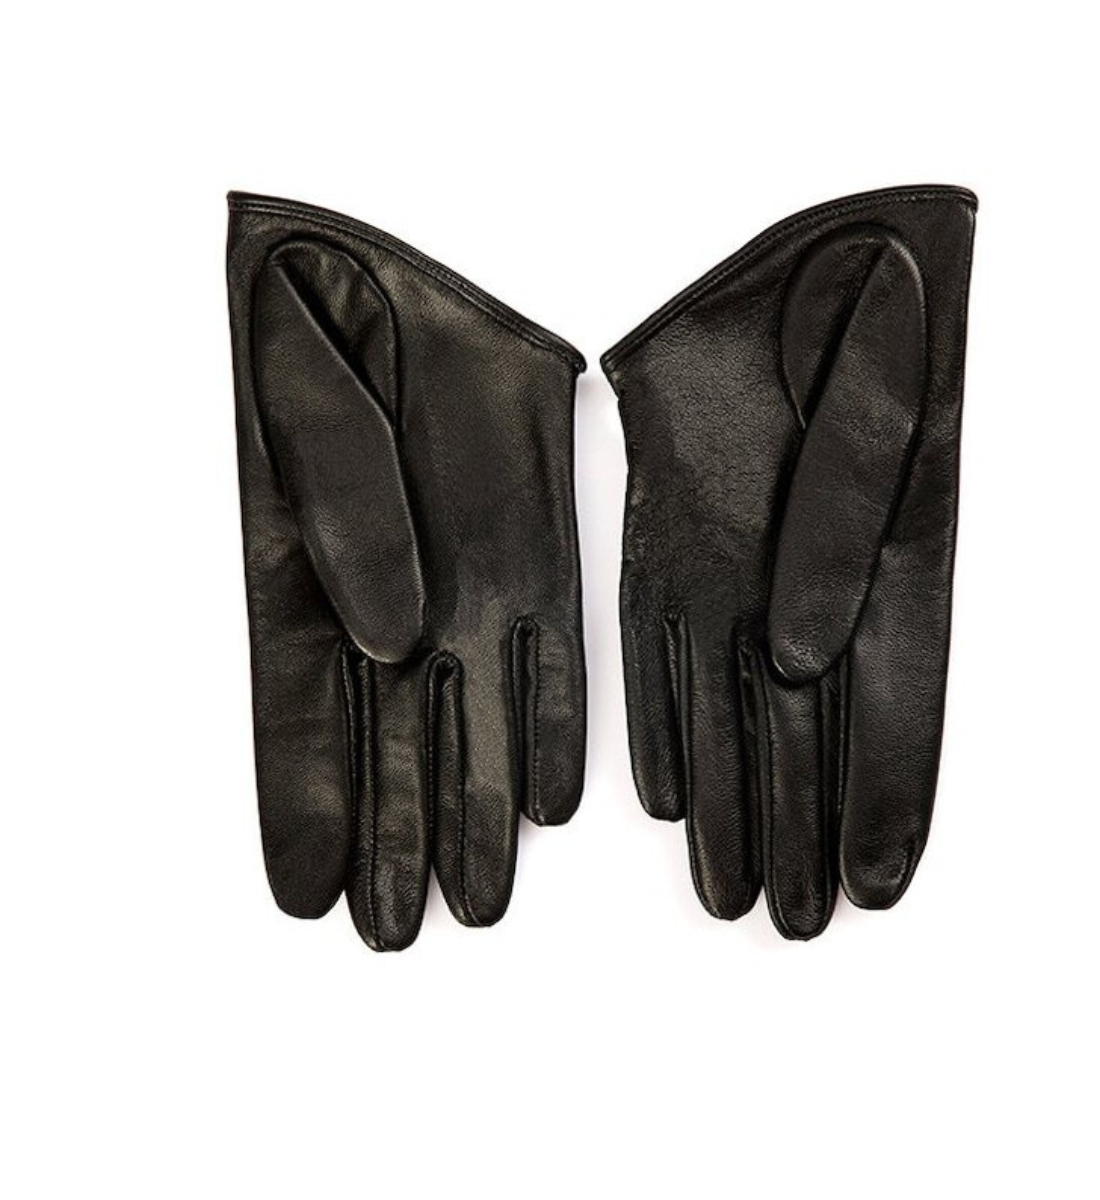 Chic Black Leather Half Gloves for Women